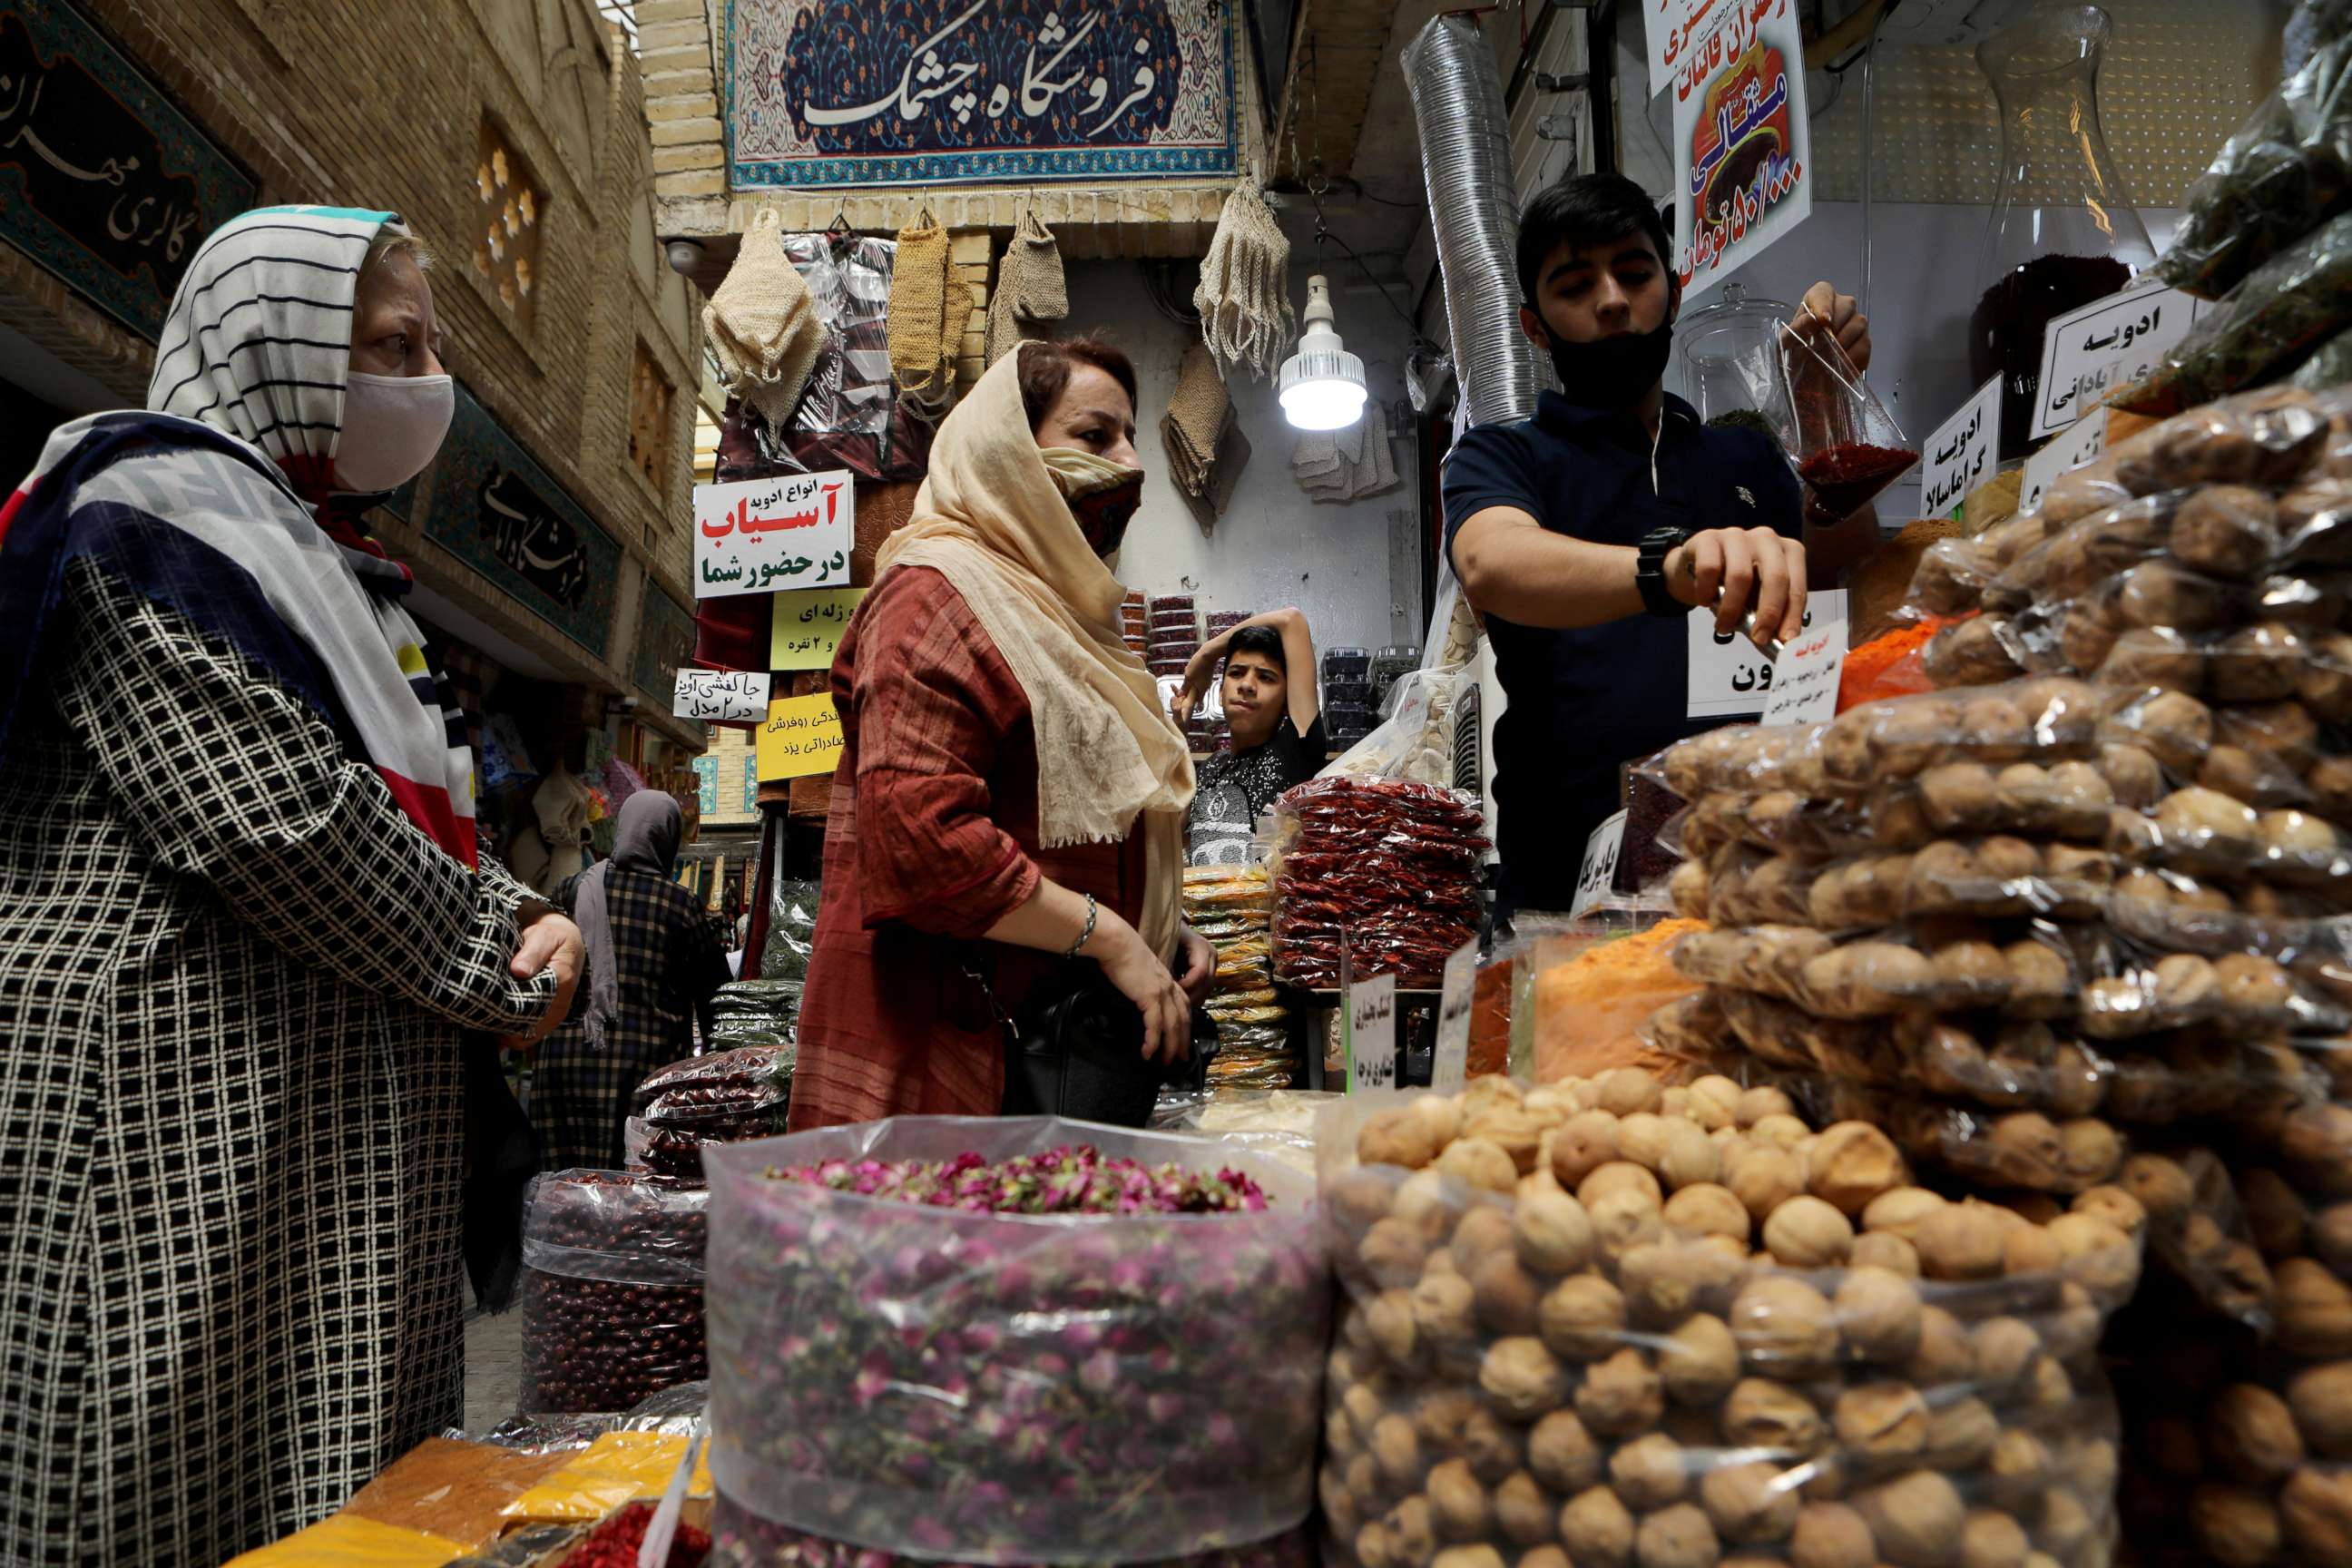 PHOTO: Women wearing protective face masks shop at a bazaar following the outbreak of the coronavirus disease (COVID-19), in Tehran, Iran, July 8, 2020.